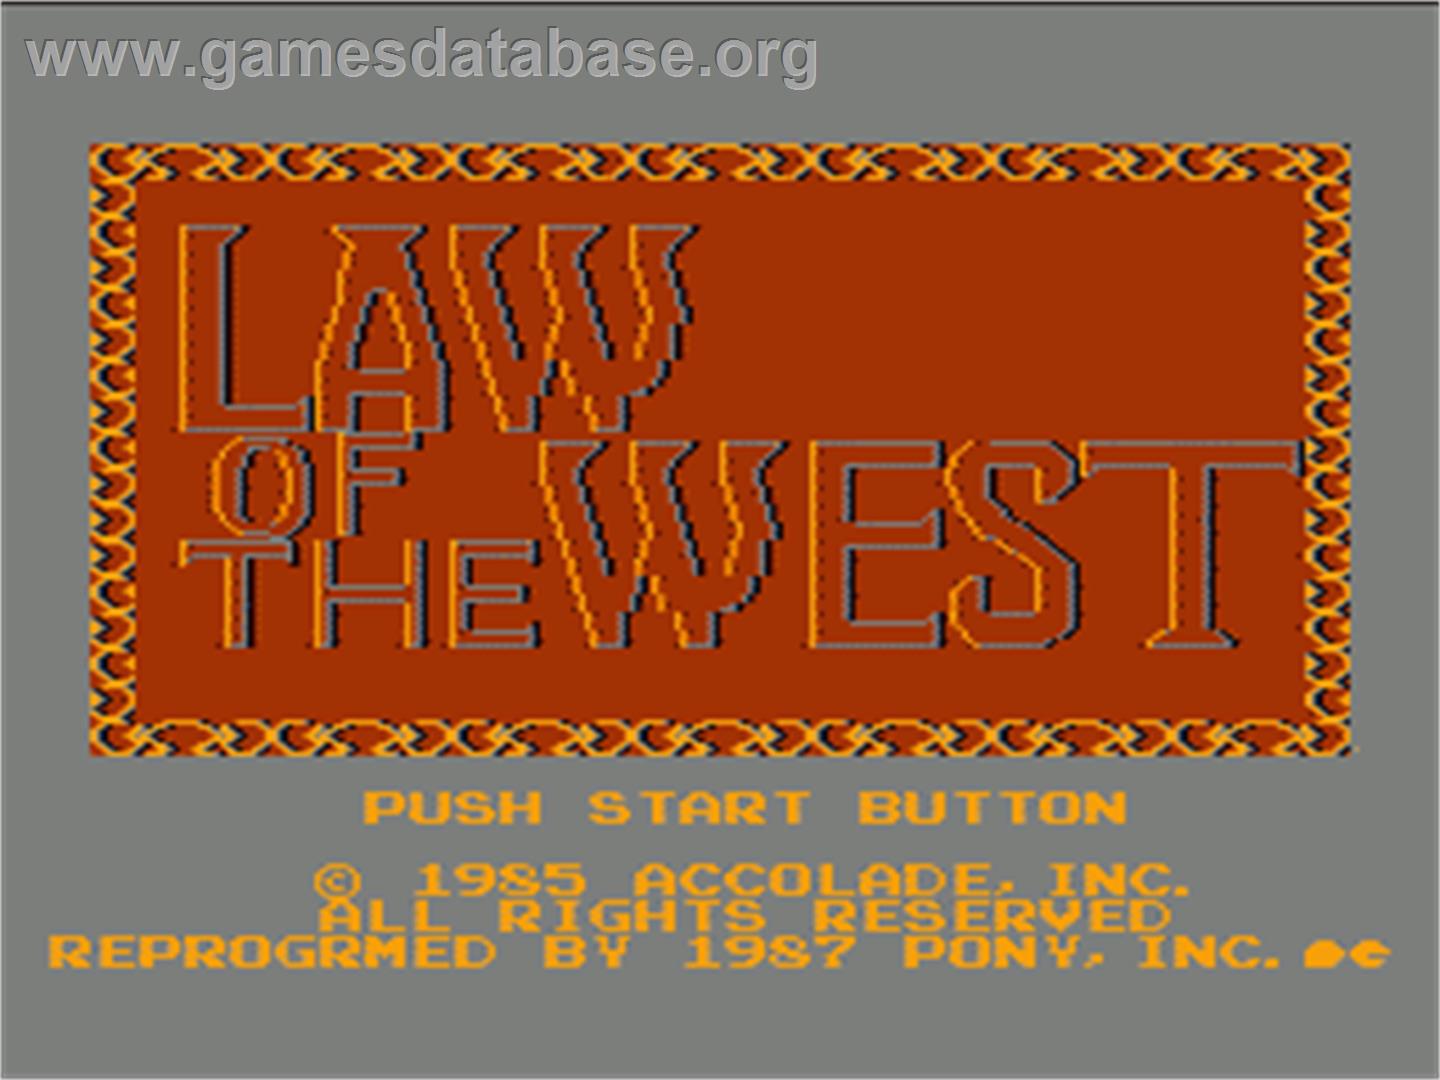 Law of the West - Nintendo NES - Artwork - Title Screen